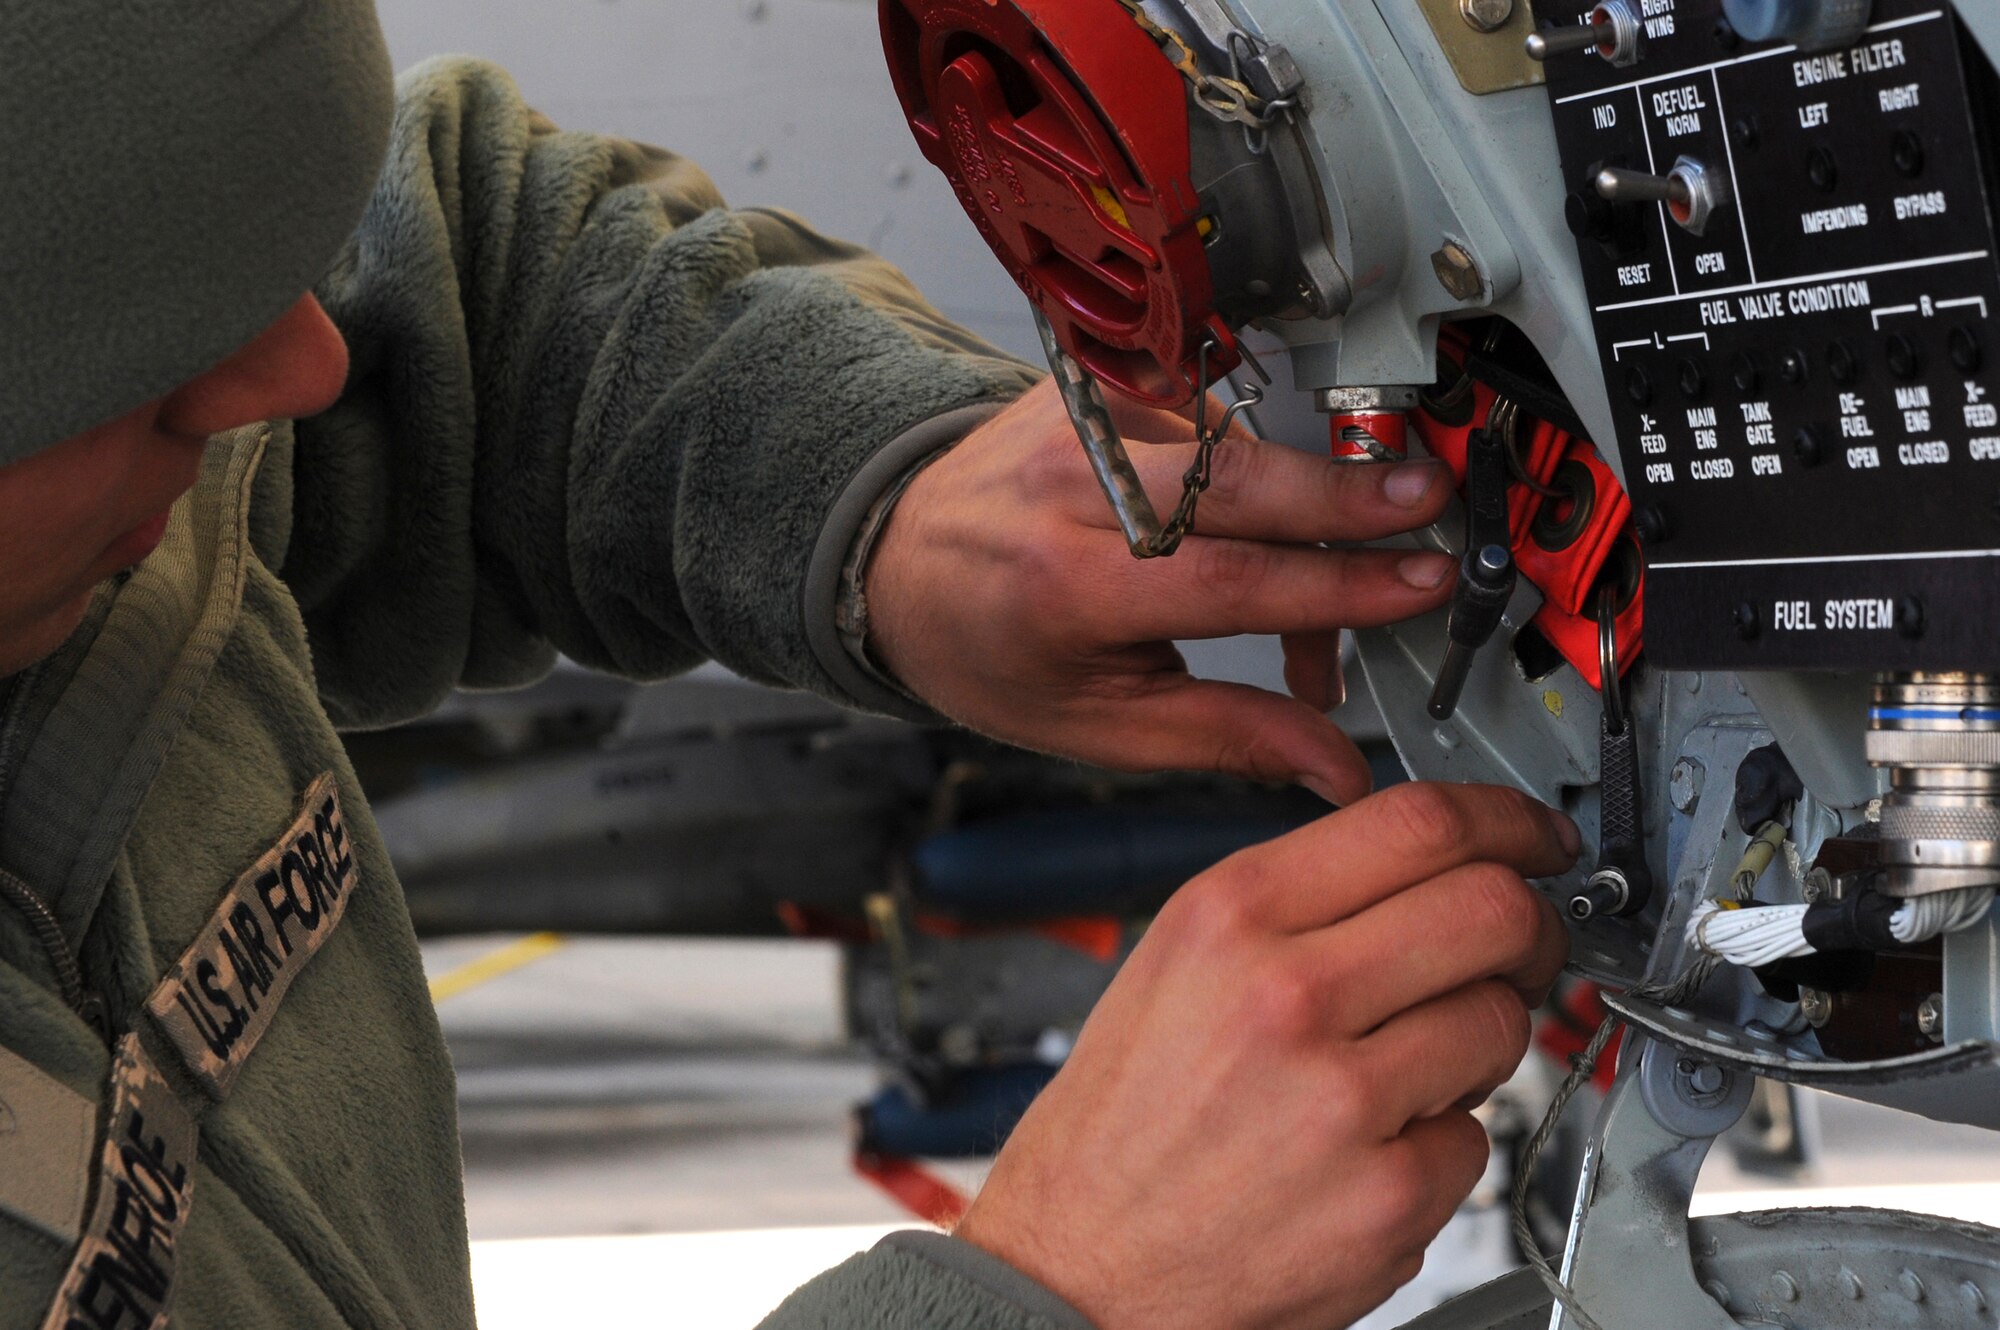 U.S. Air Force Airman 1st Class Chris Renfroe, 74th Aircraft Maintenance Unit crew chief, places landing gear safety pins in an A-10C Thunderbolt II prior to a flight, Jan. 5, 2016, at Moody Air Force Base, Ga. The pins prevent the landing gear from collapsing which could cause a mishap. (U.S. Air Force photo by Airman 1st Class Kathleen D. Bryant/Released)
